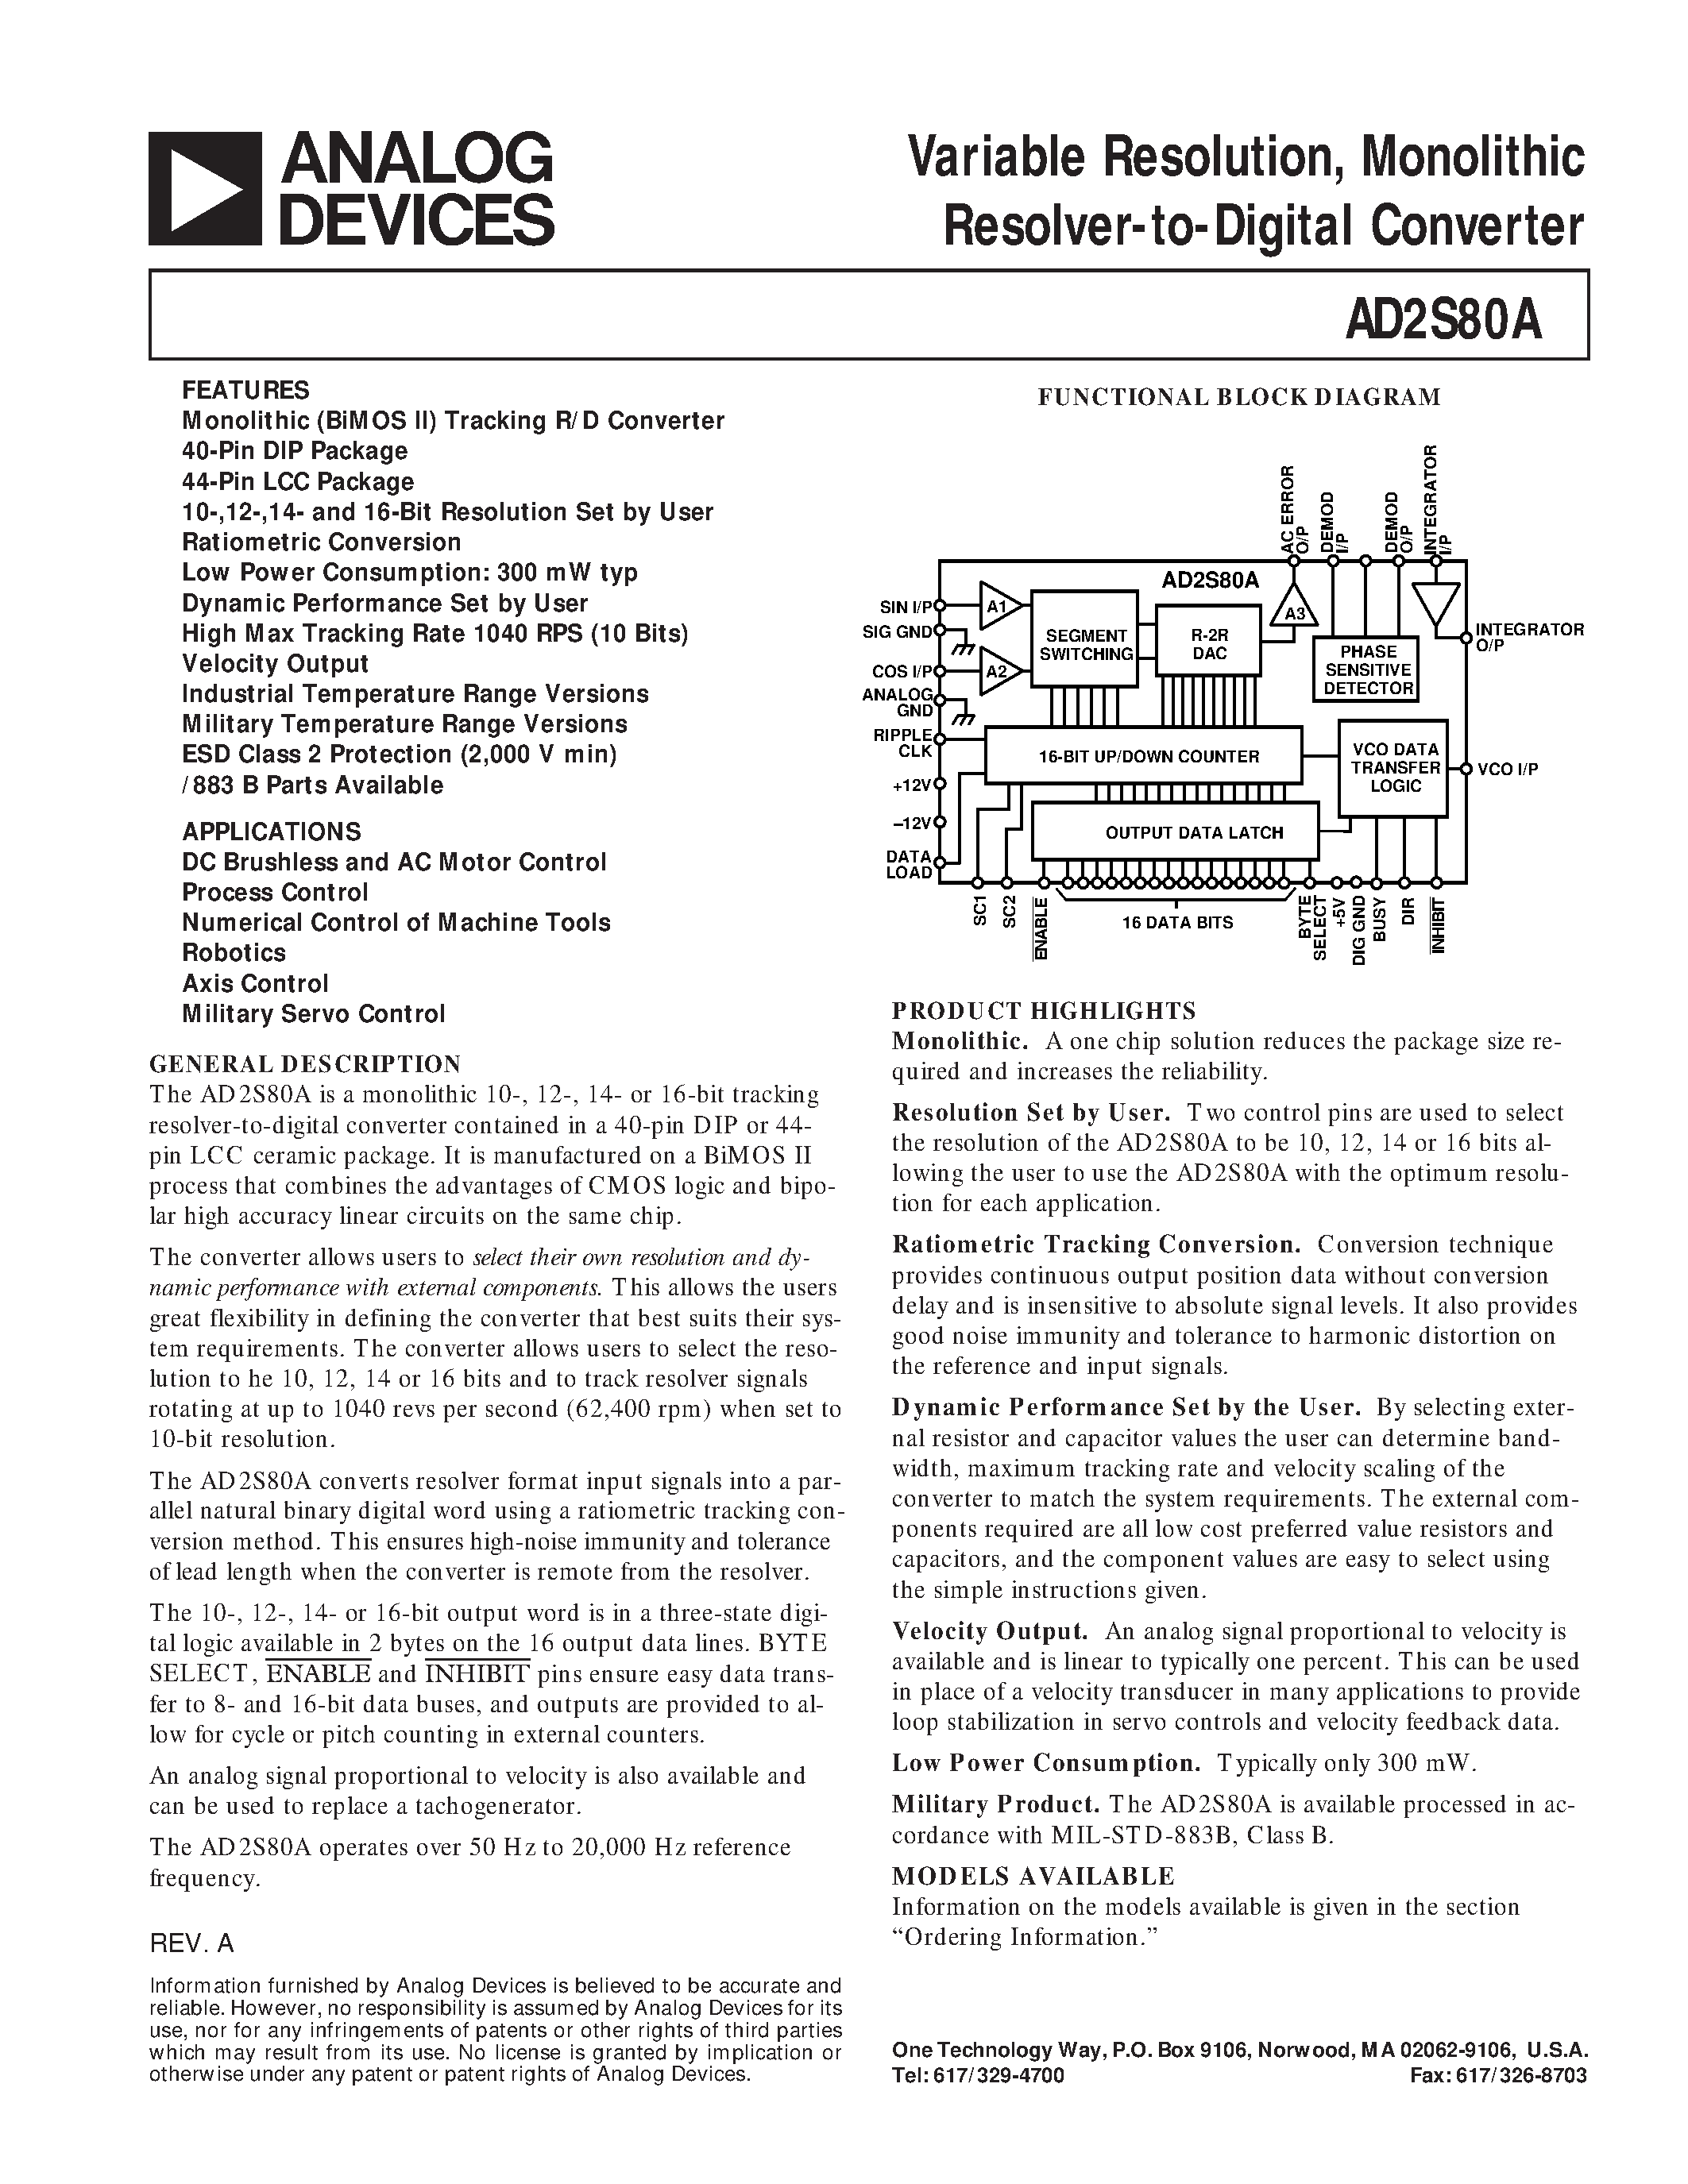 Datasheet AD2S80AJD - Variable Resolution/ Monolithic Resolver-to-Digital Converter page 1